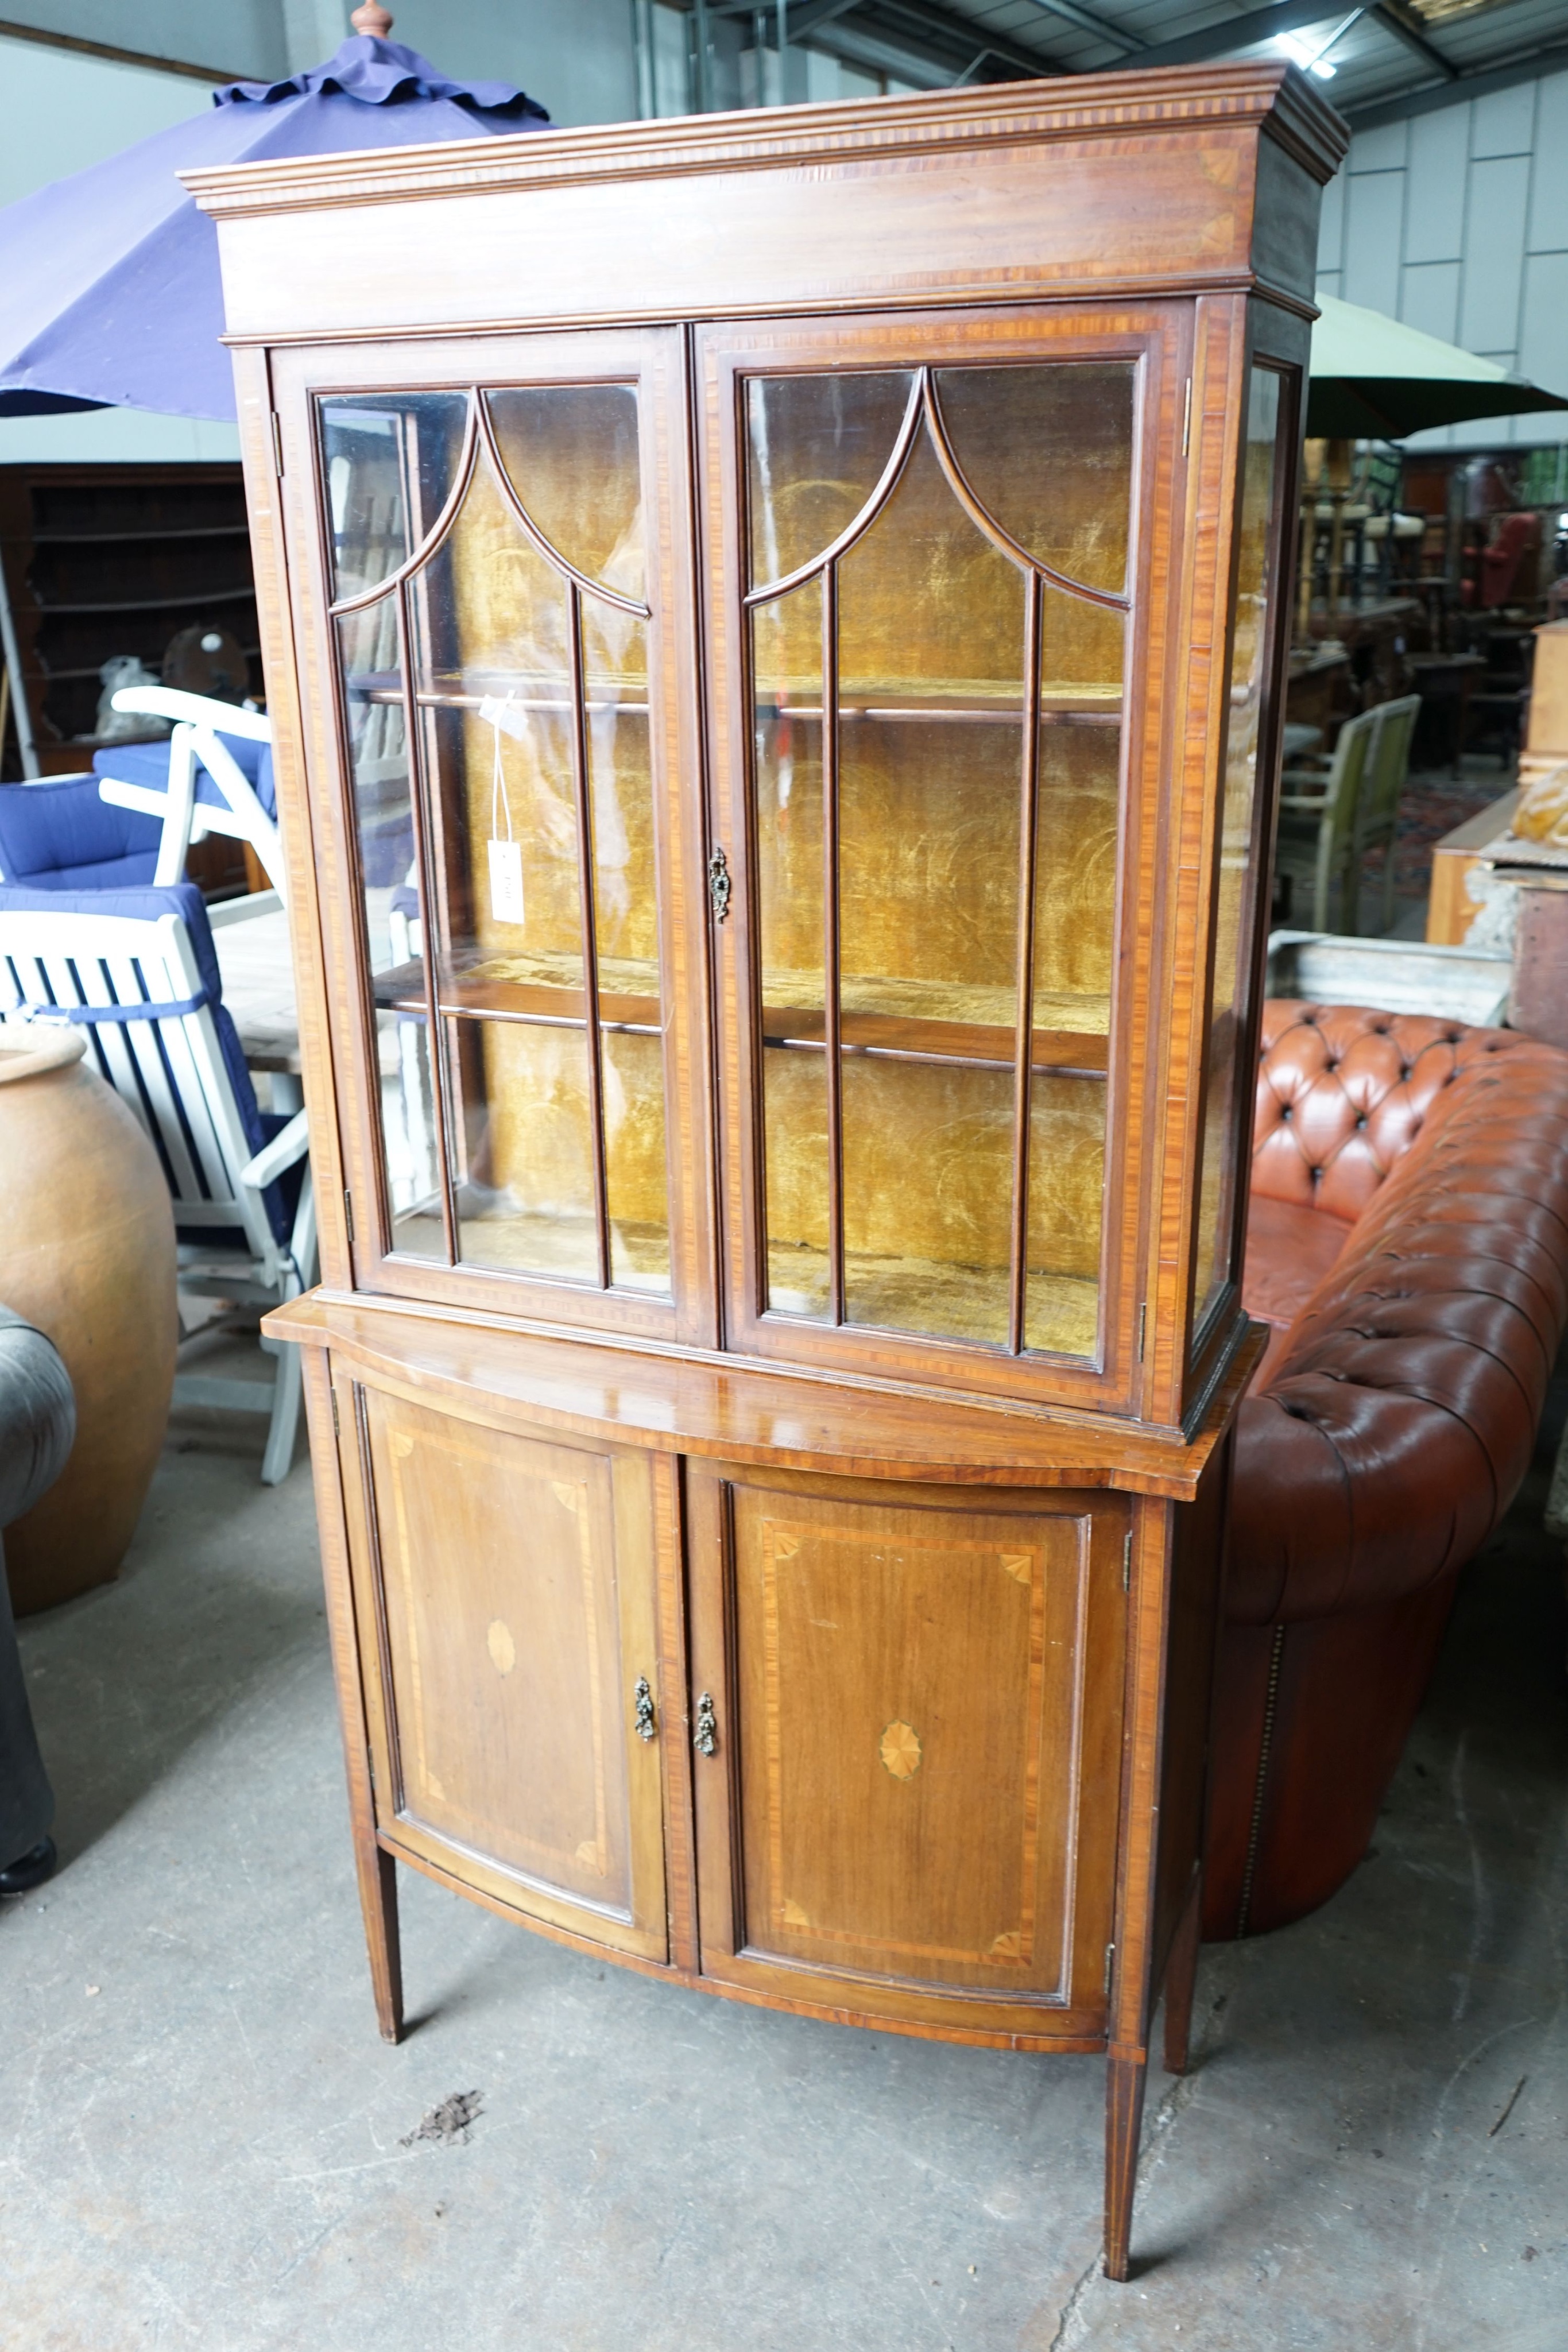 An Edwardian inlaid and satinwood banded mahogany bowfront display cabinet, width 92cm, depth 42cm, height 191cm